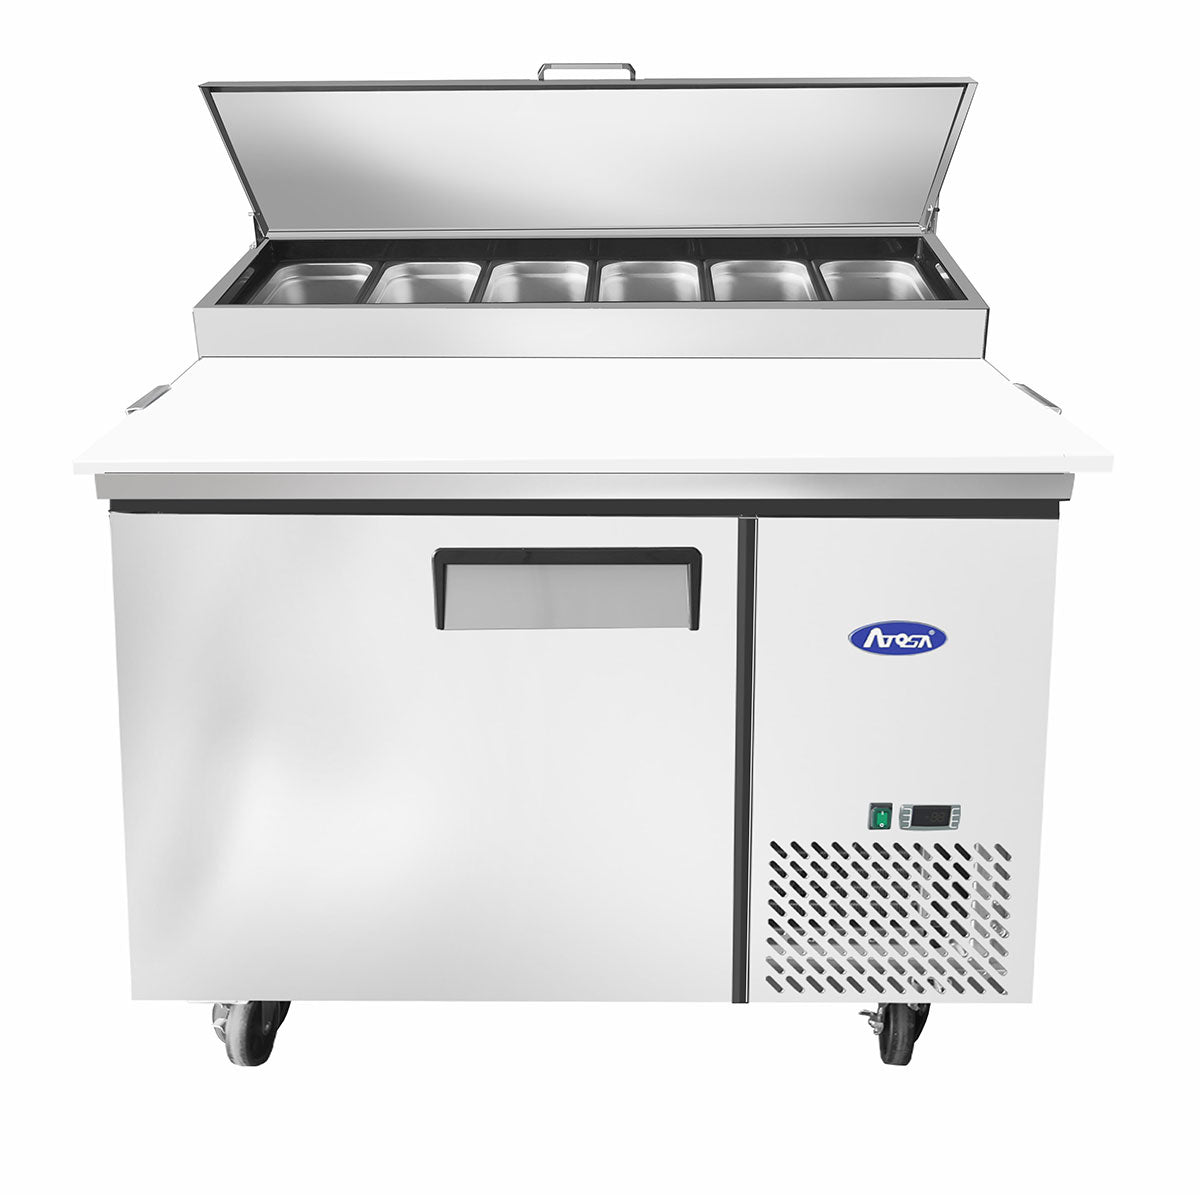 Atosa - MPF8201GR - 44″ Refrigerated Pizza Prep. Table